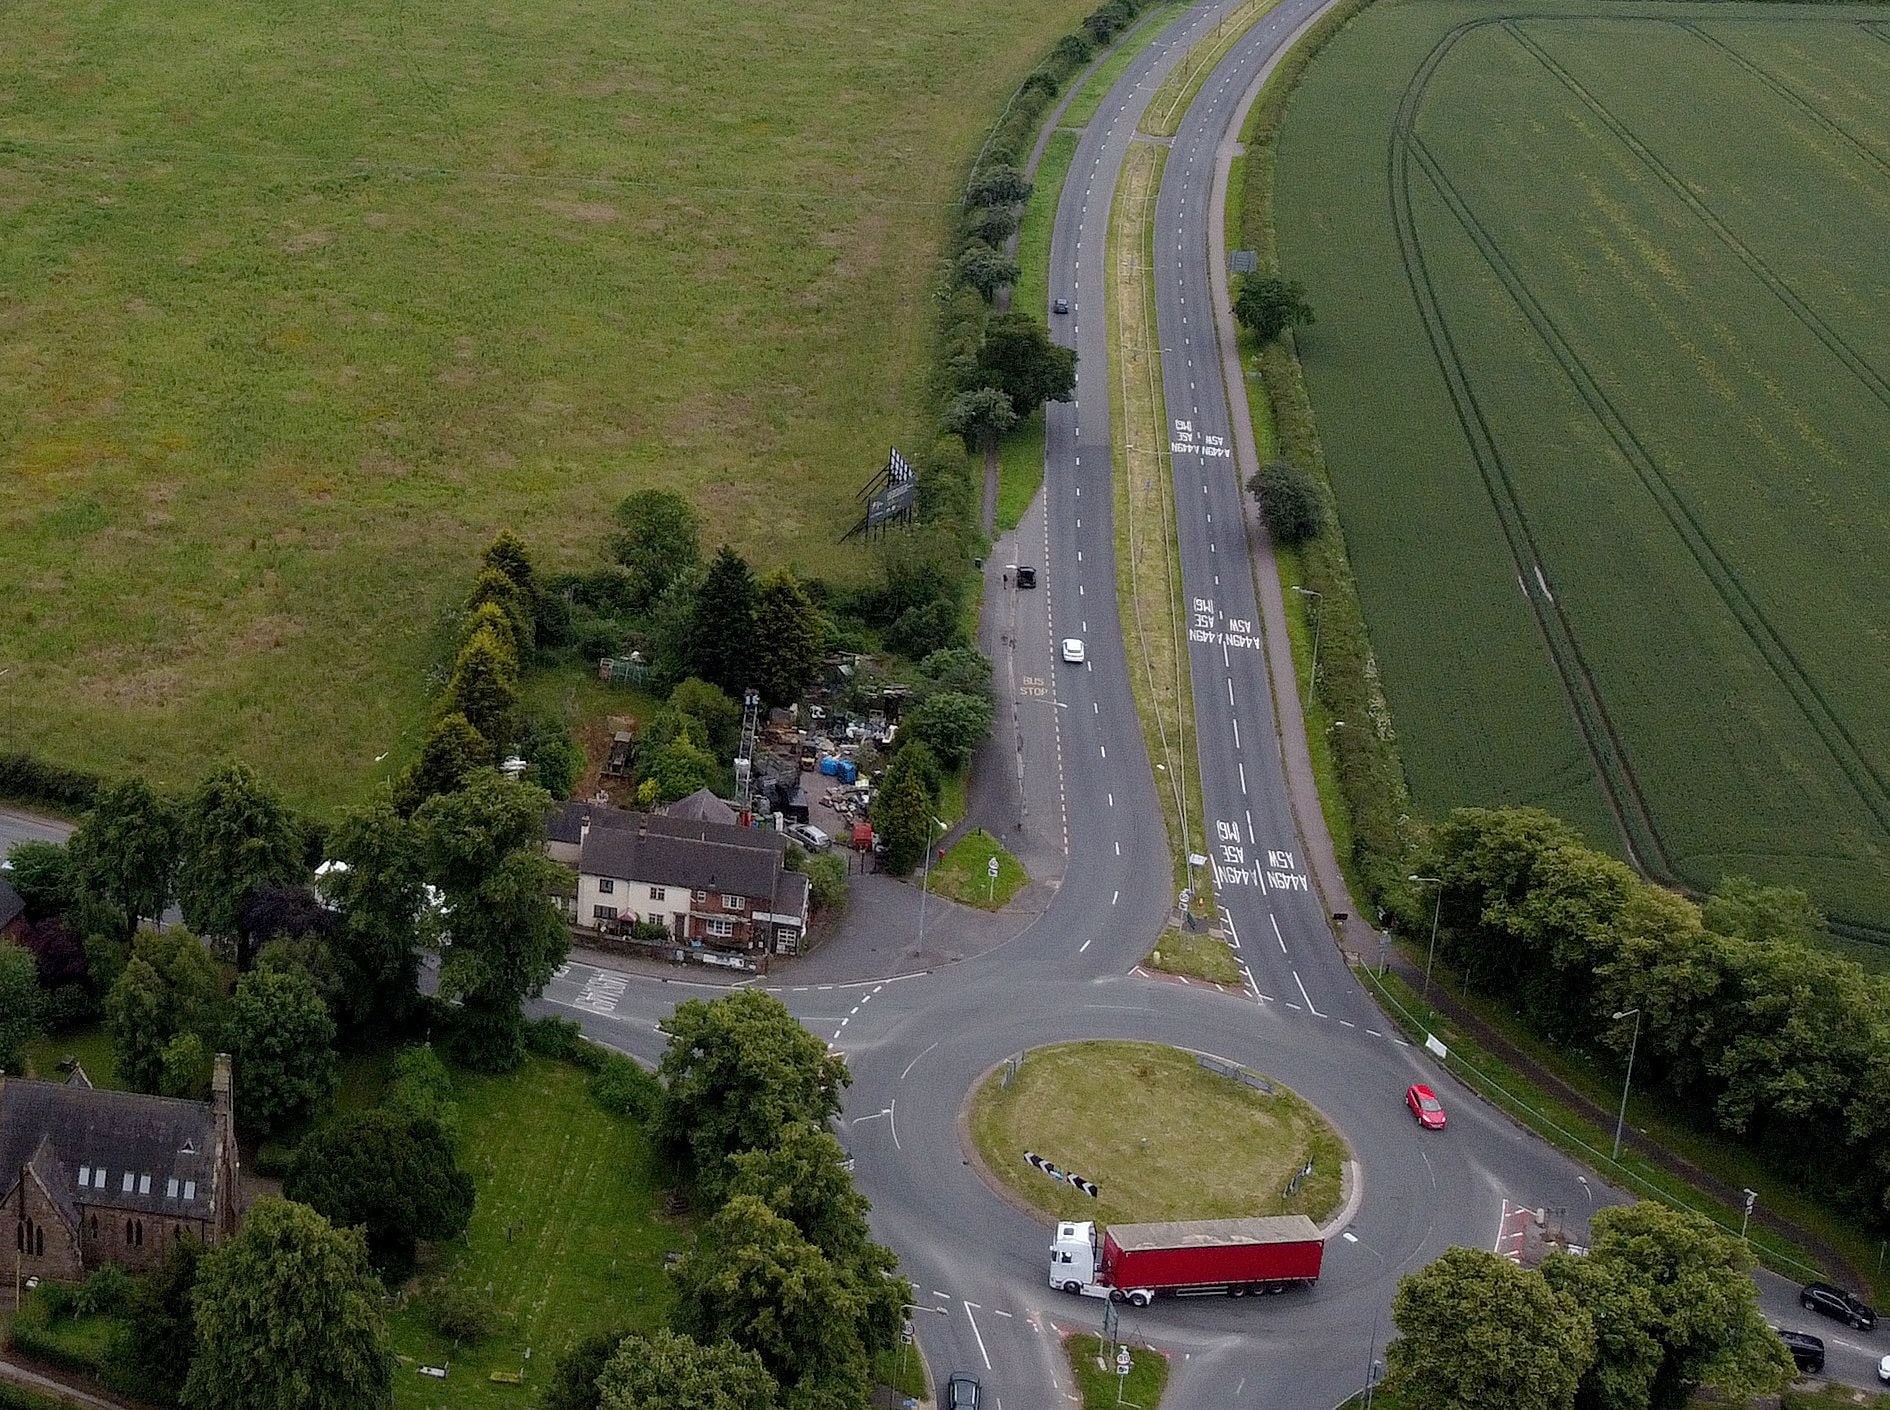 Long diversions planned for resurfacing of key roundabout linking two busy roads next week